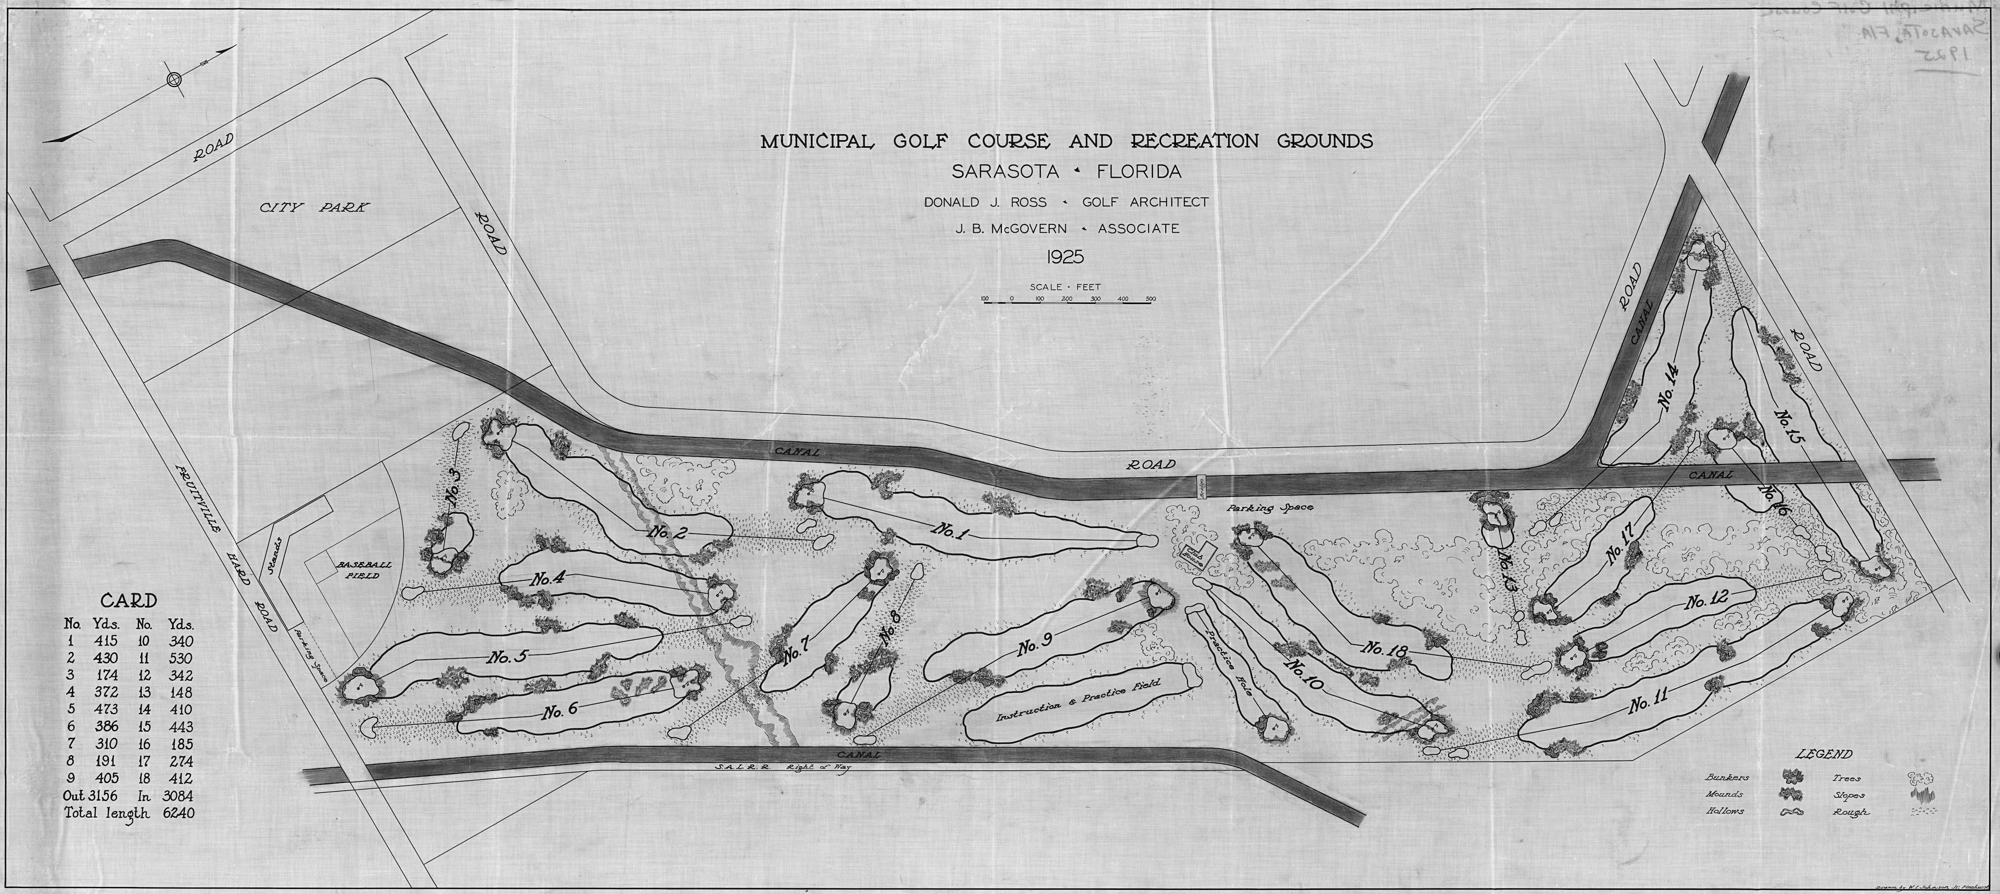 The Donald Ross layout of the Bobby Jones Golf Complex shows the original 18 holes that are being restored by golf course architect Richard Mandell. (Courtesy image)